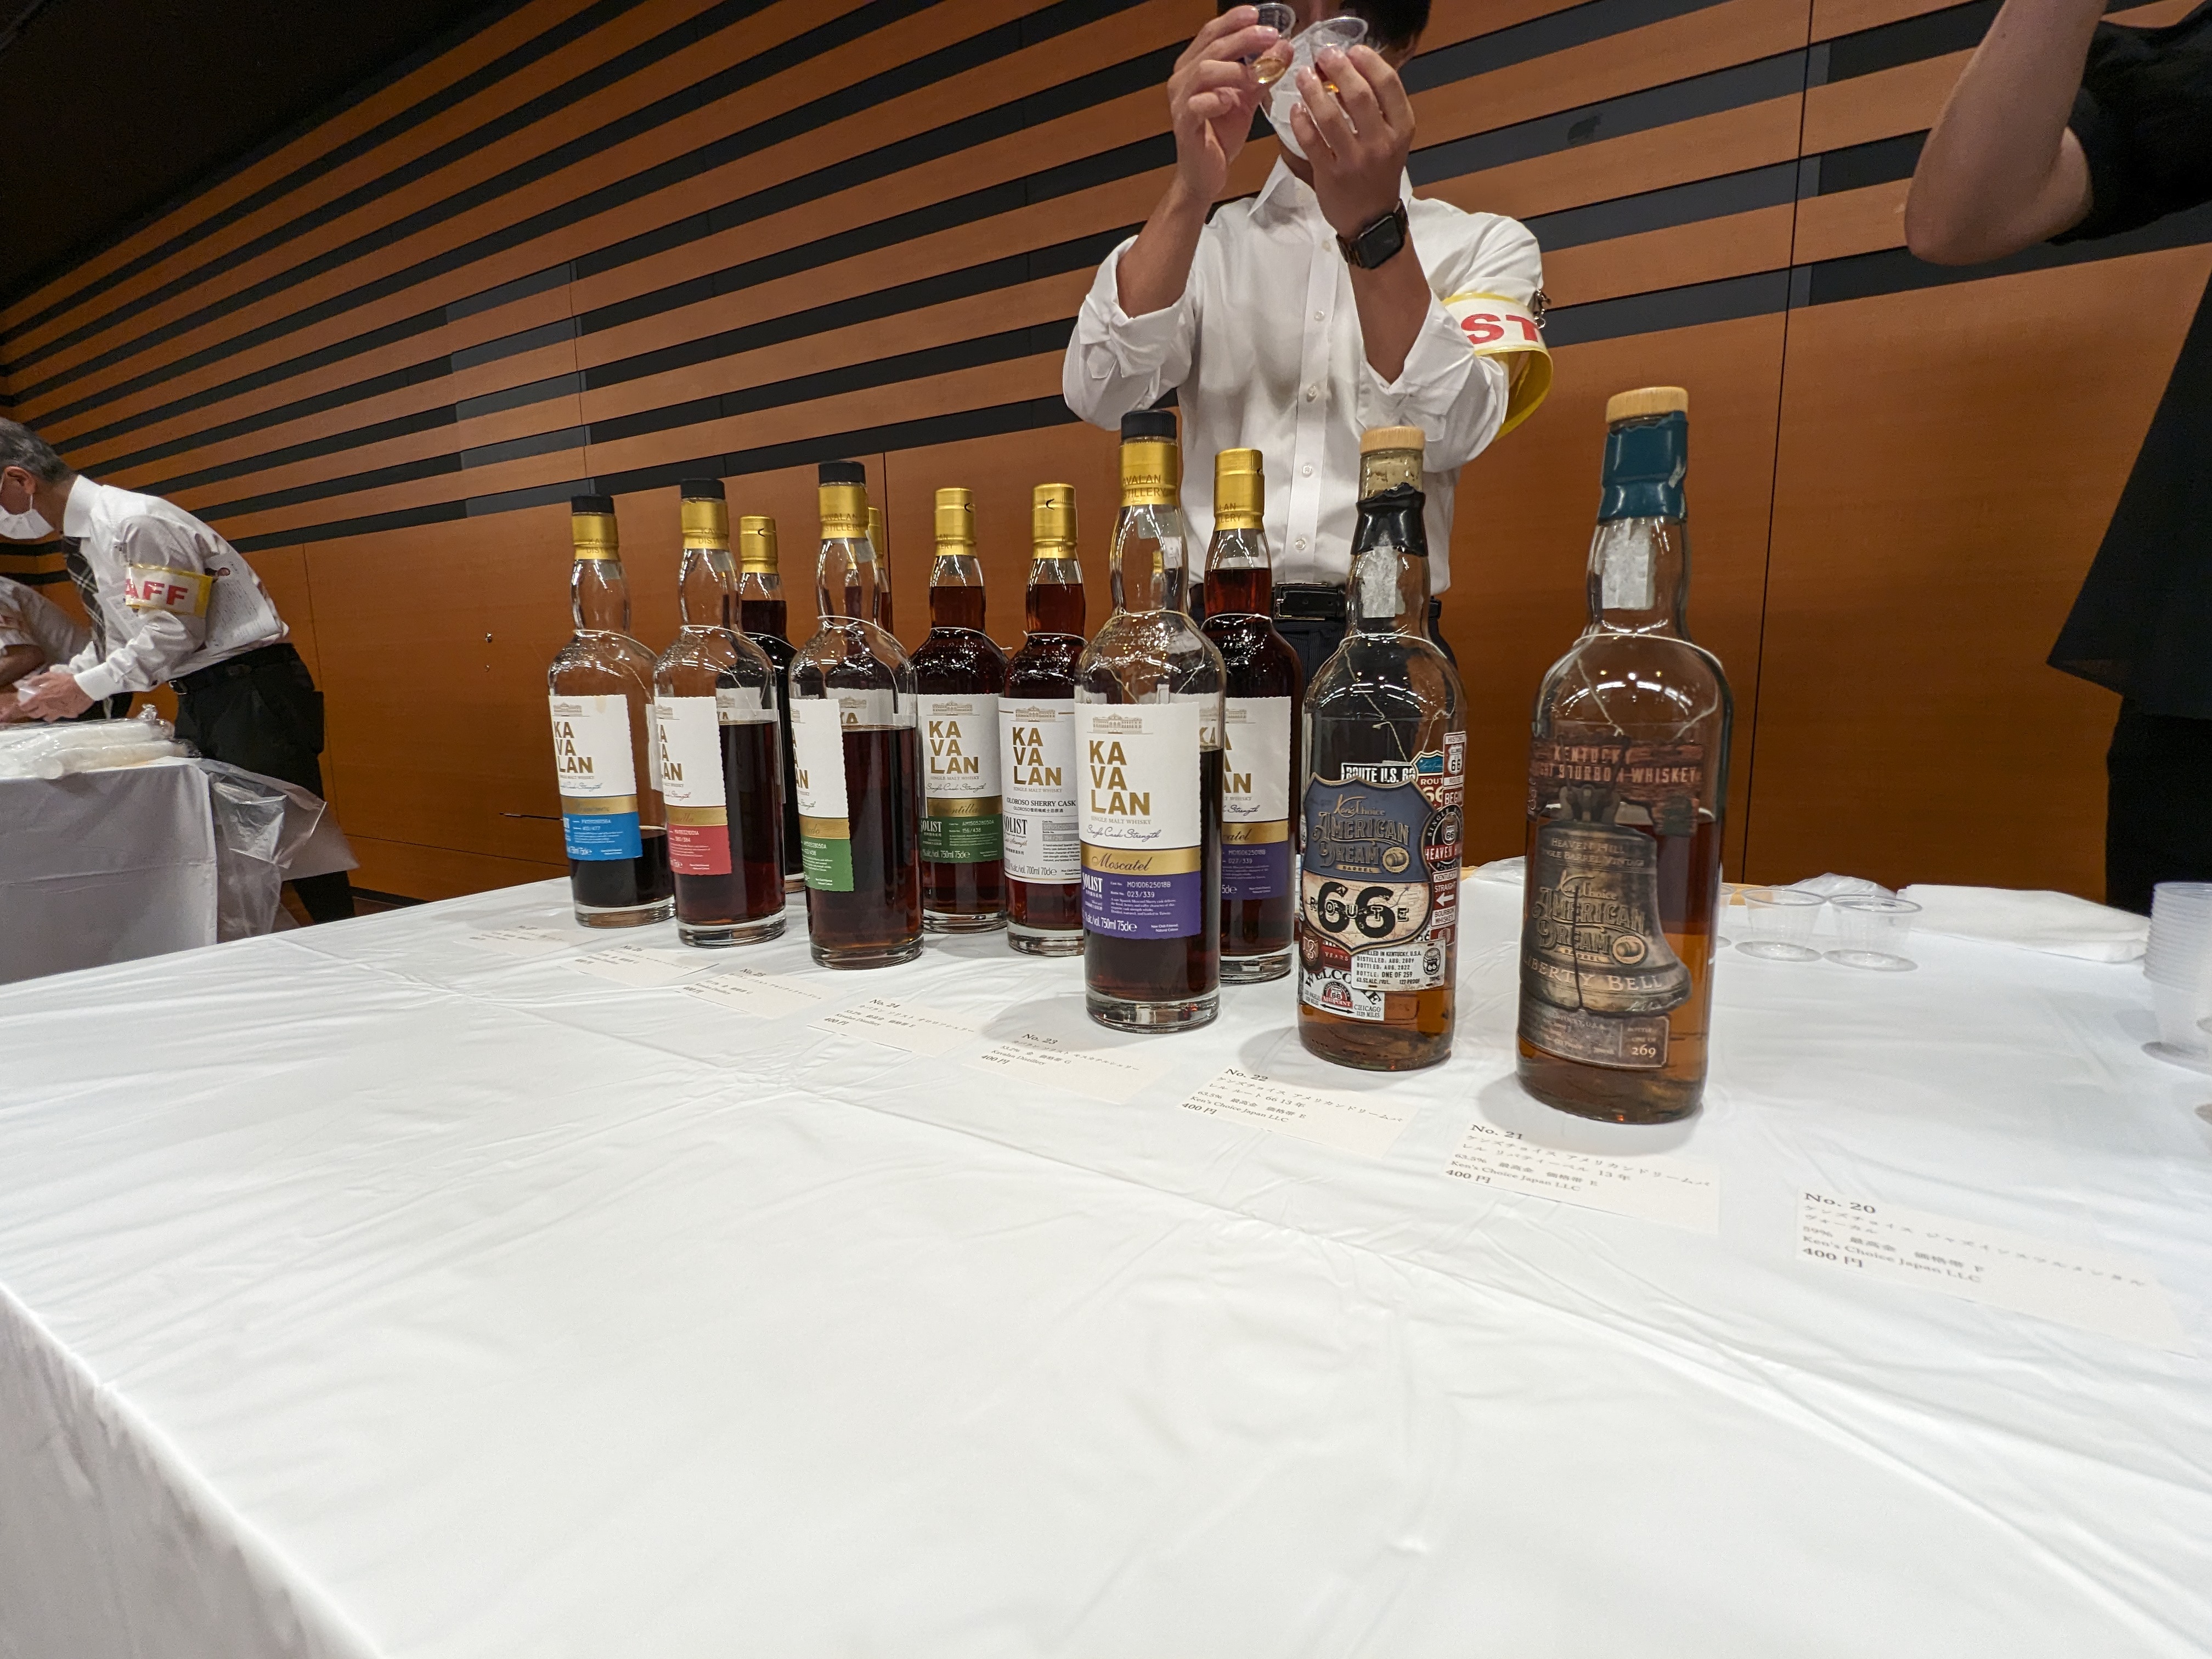 Paid tastings for other world whiskies